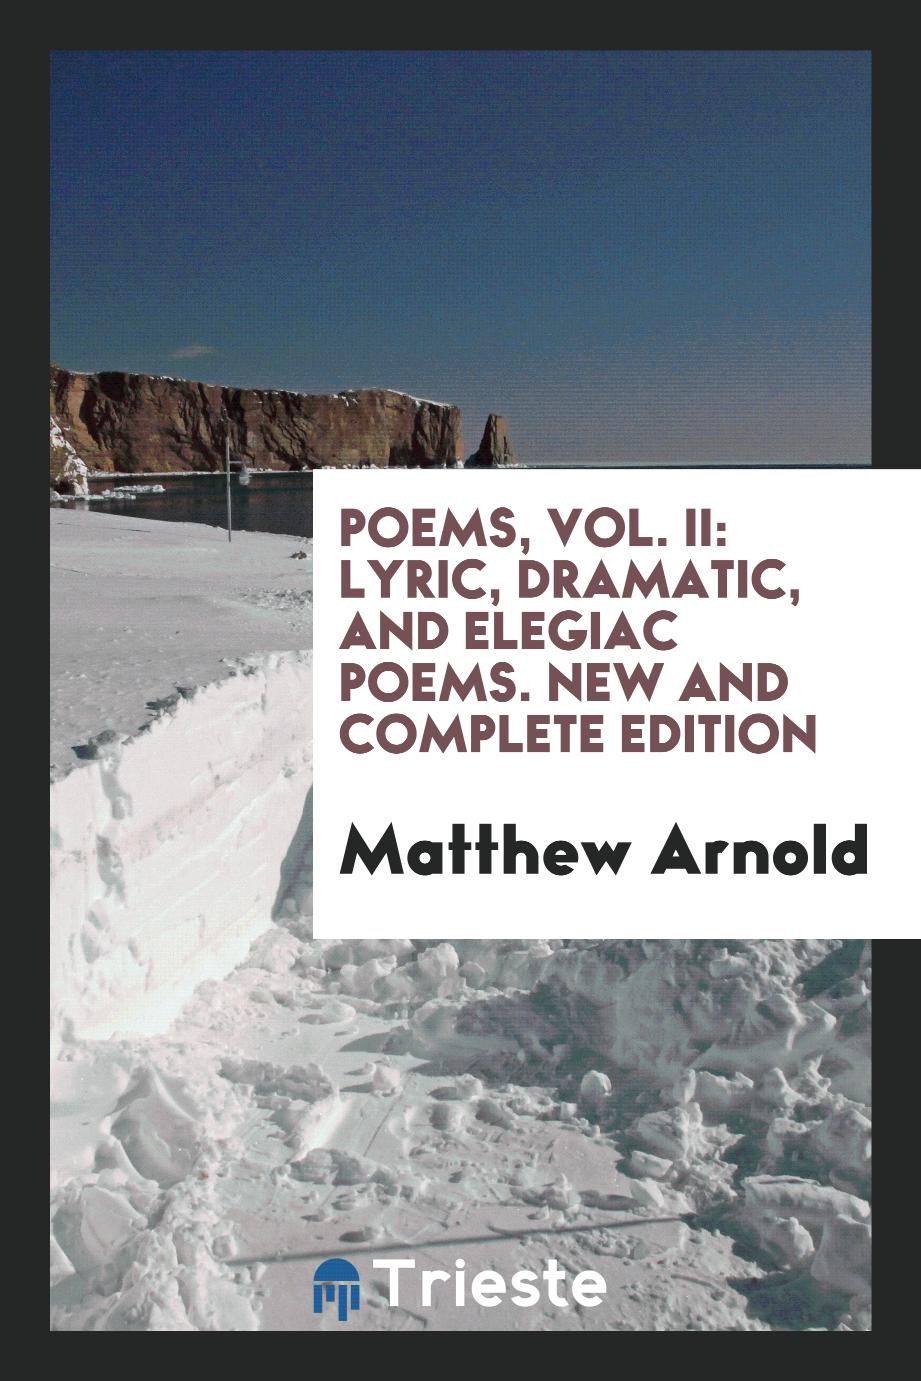 Poems, Vol. II: Lyric, Dramatic, and Elegiac Poems. New and Complete Edition